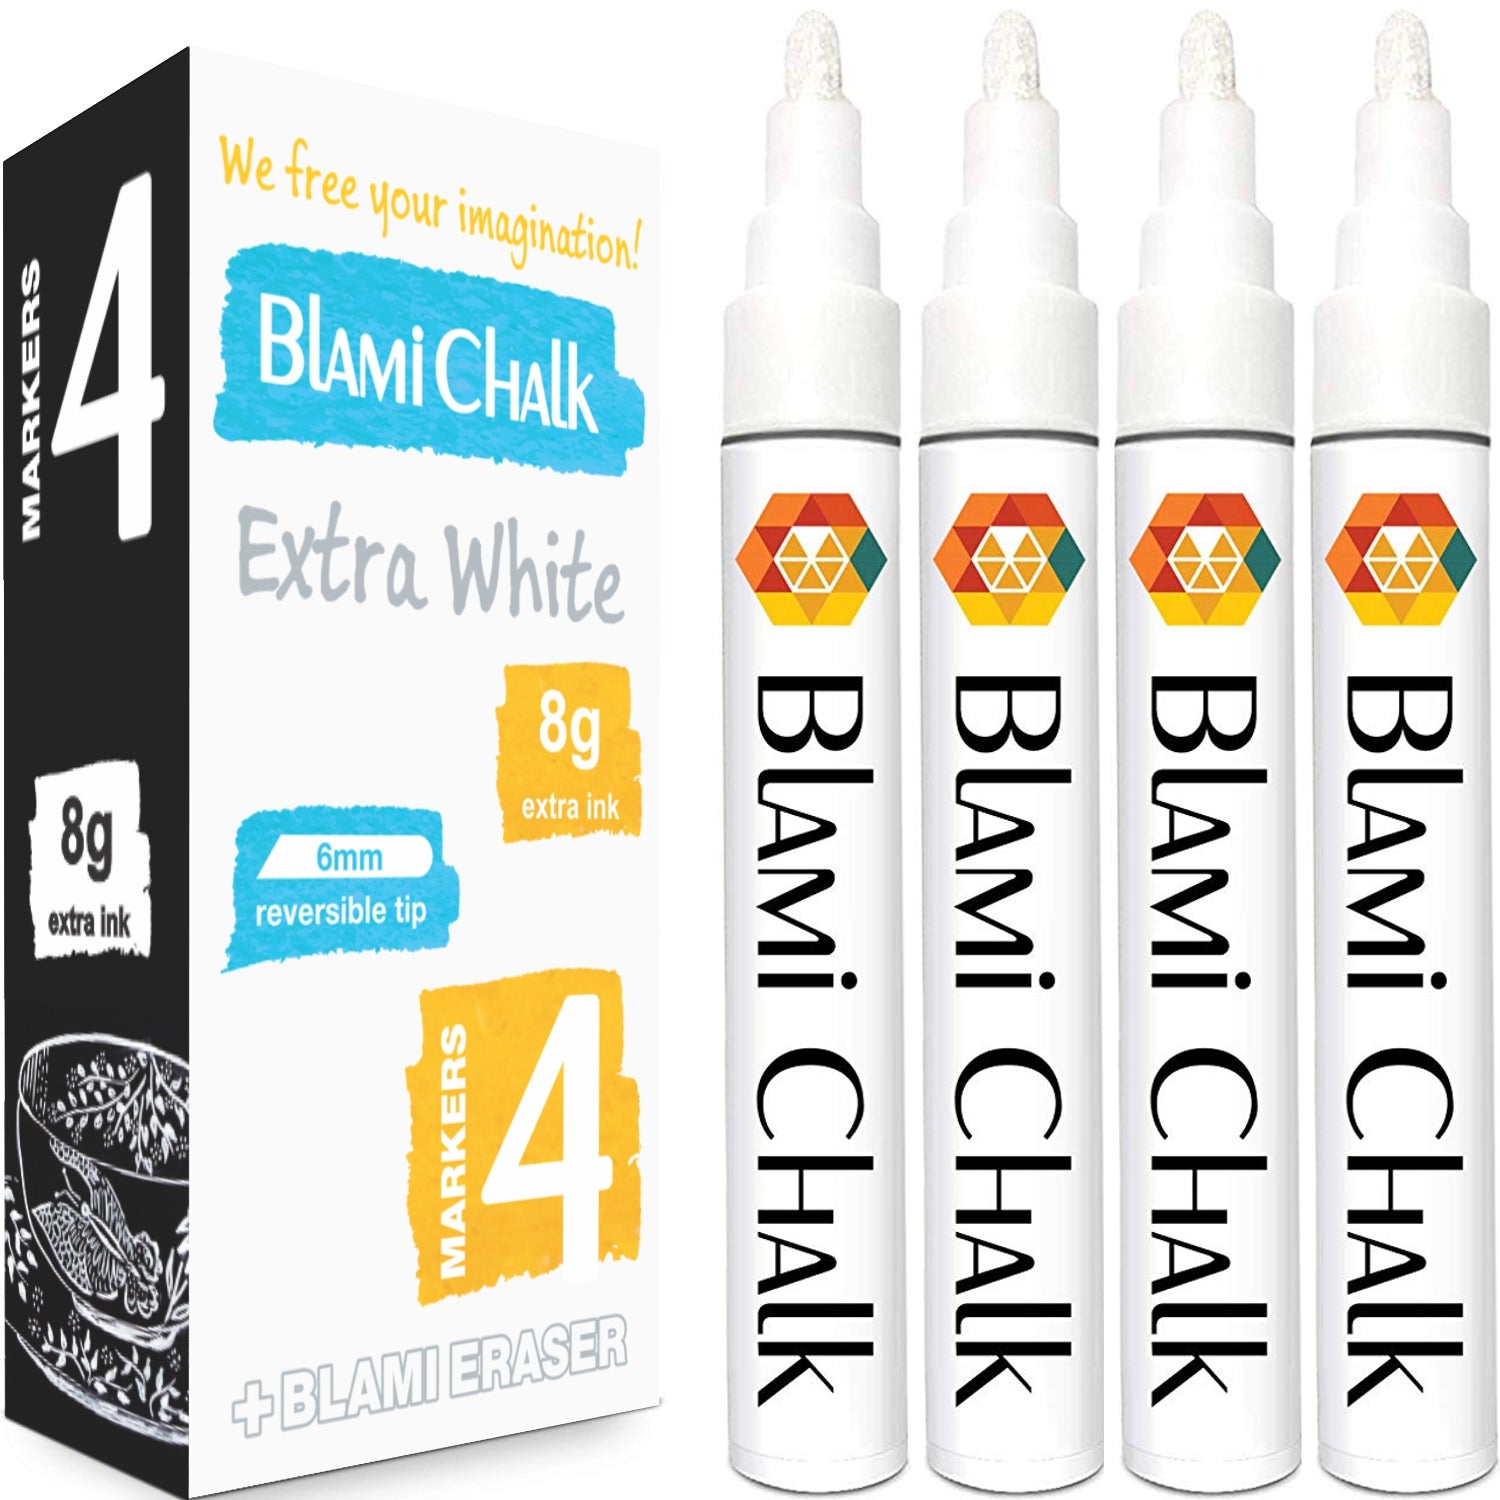 Chalk and Eraser Set - Comes with Colored and White Chalk. by Basic